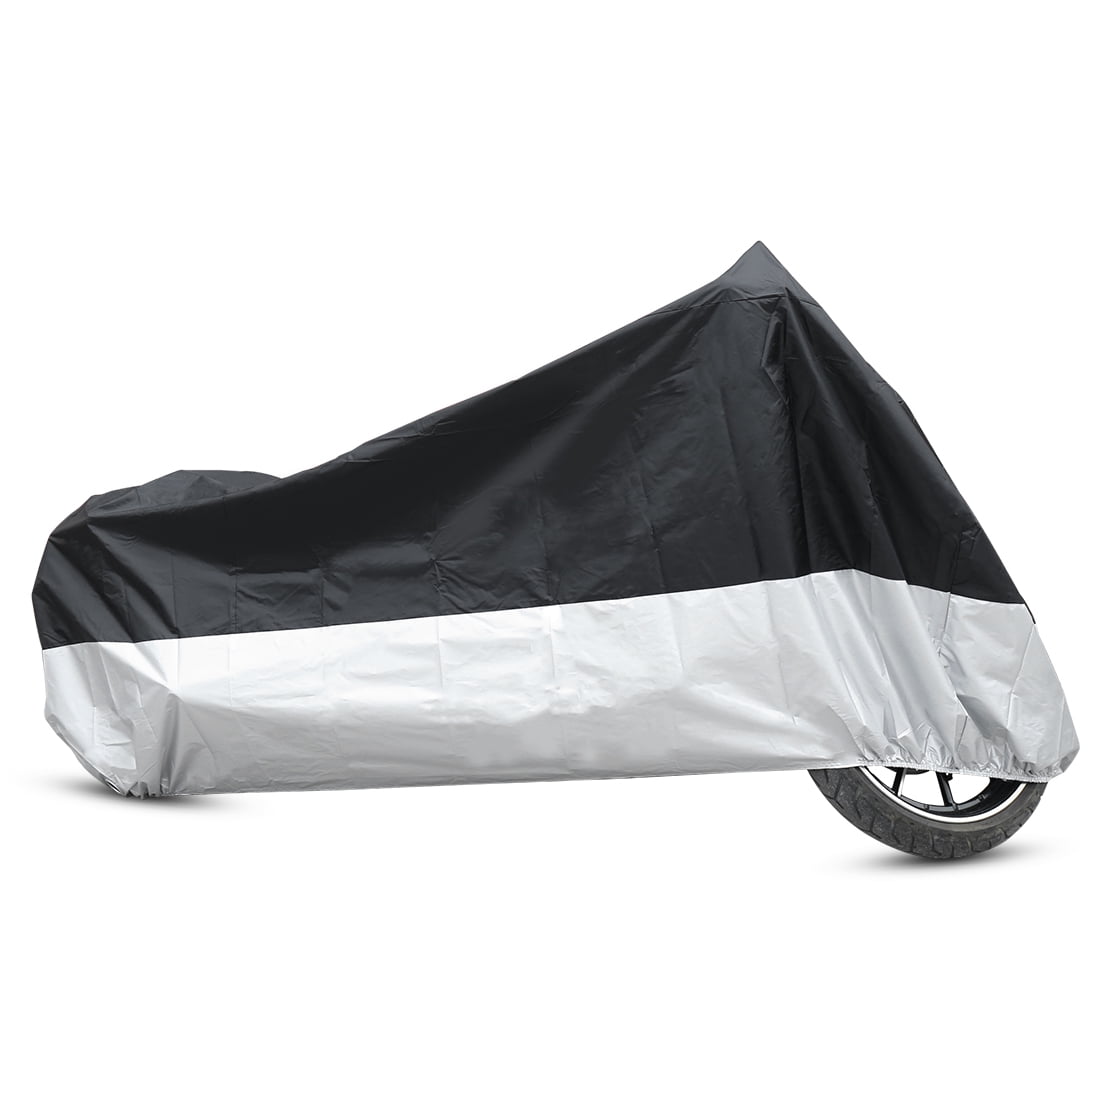 2XL Motorcycle Cover Waterproof Heavy Duty For Harley Davidson Sportster Softail 